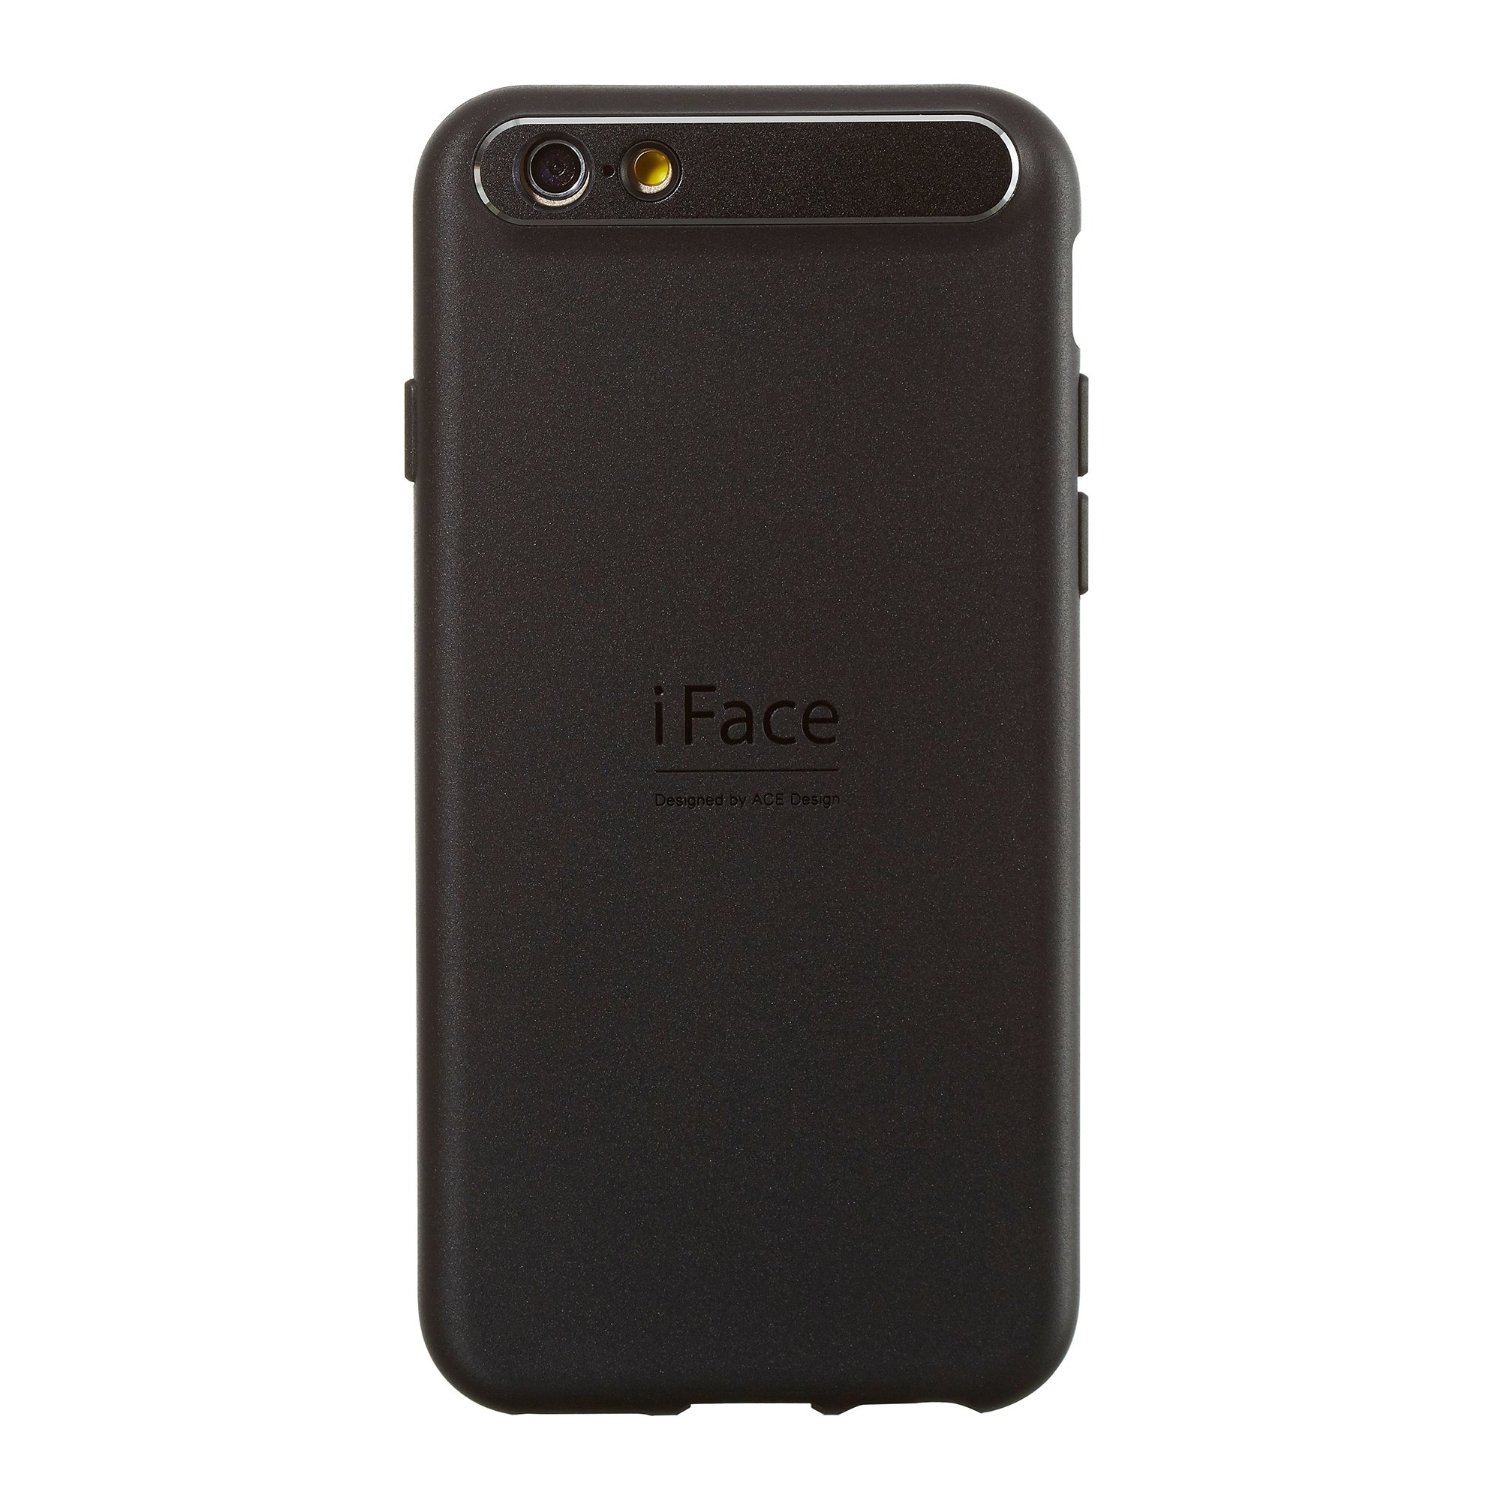 iFace New Generation Case for iPhone 6